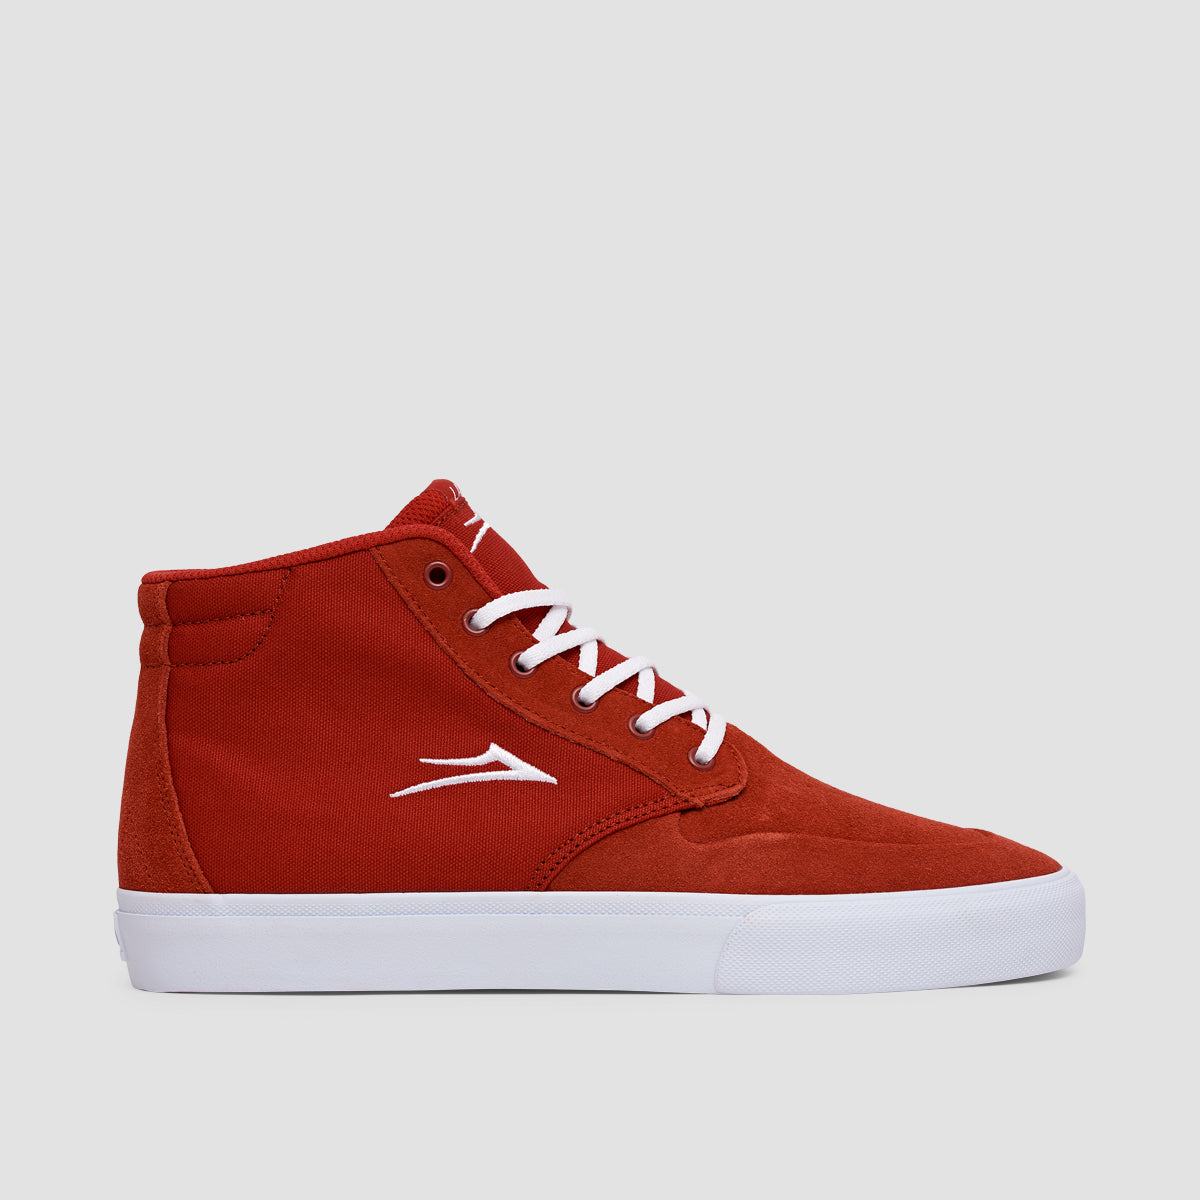 Lakai Riley 3 High Shoes - Red Suede